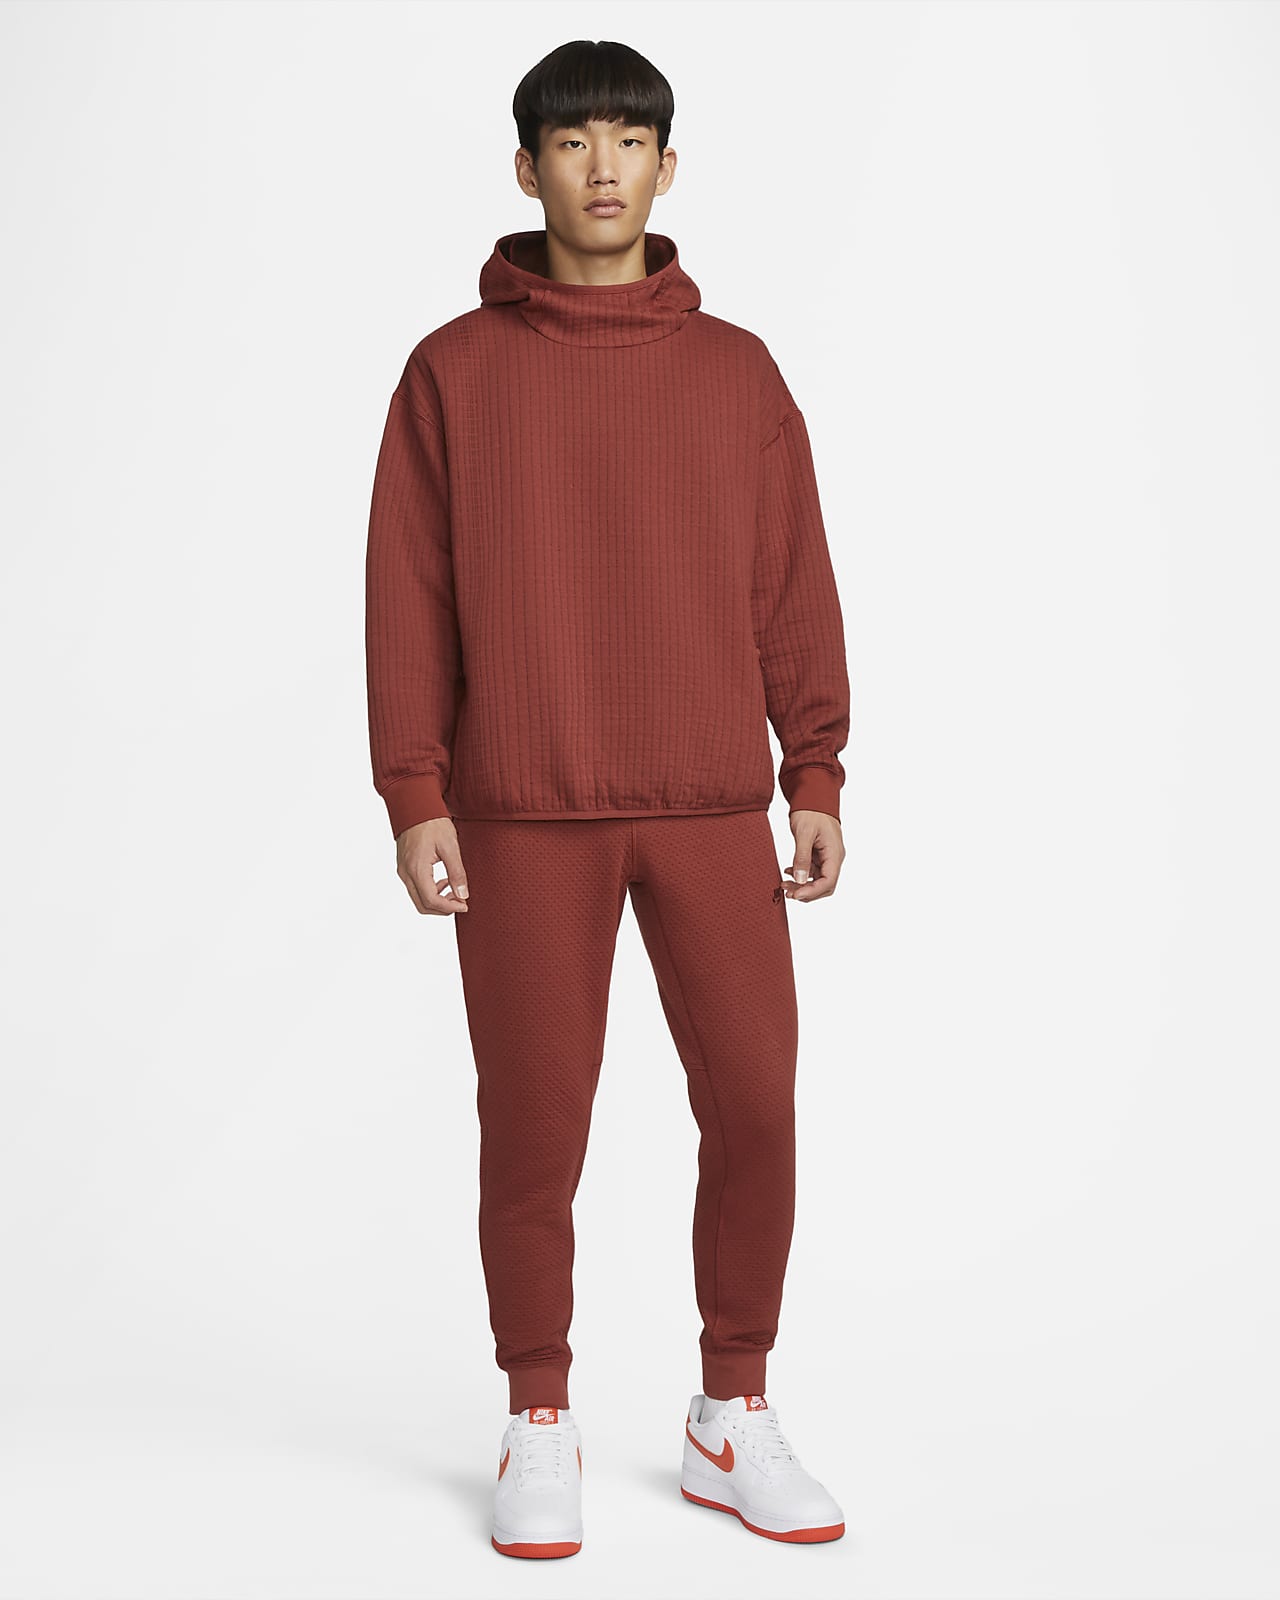 Nike Sportswear Therma-FIT ADV Pullover. Engineered Tech Pack